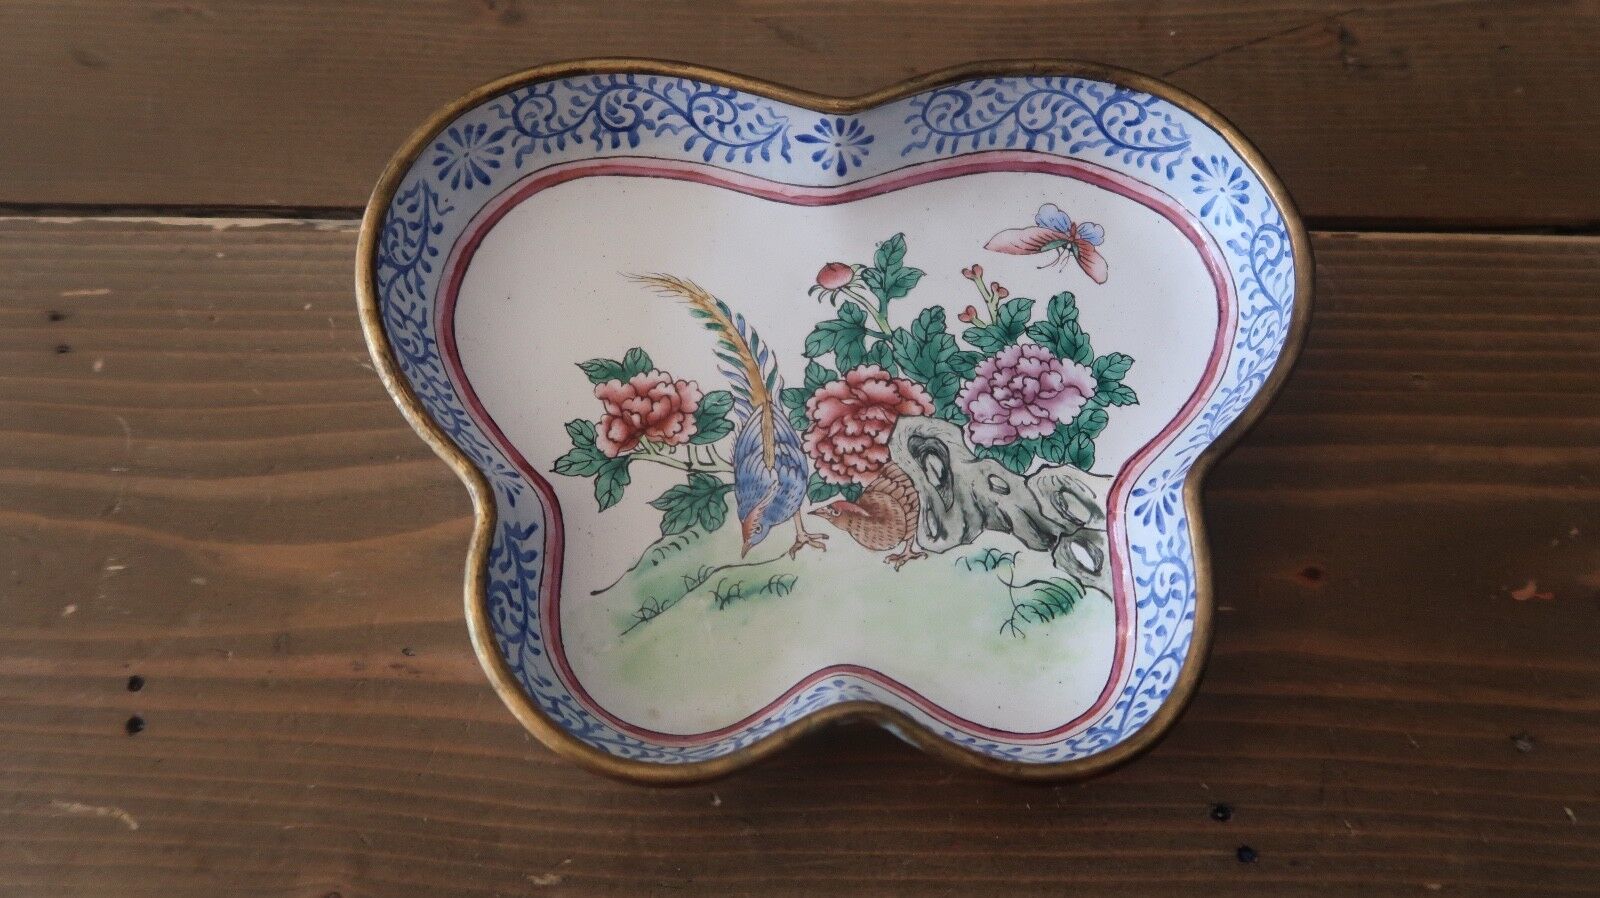 Primary image for Vintage Hand Painted Soap Dish 6 3/8 x 5 1/8 inches